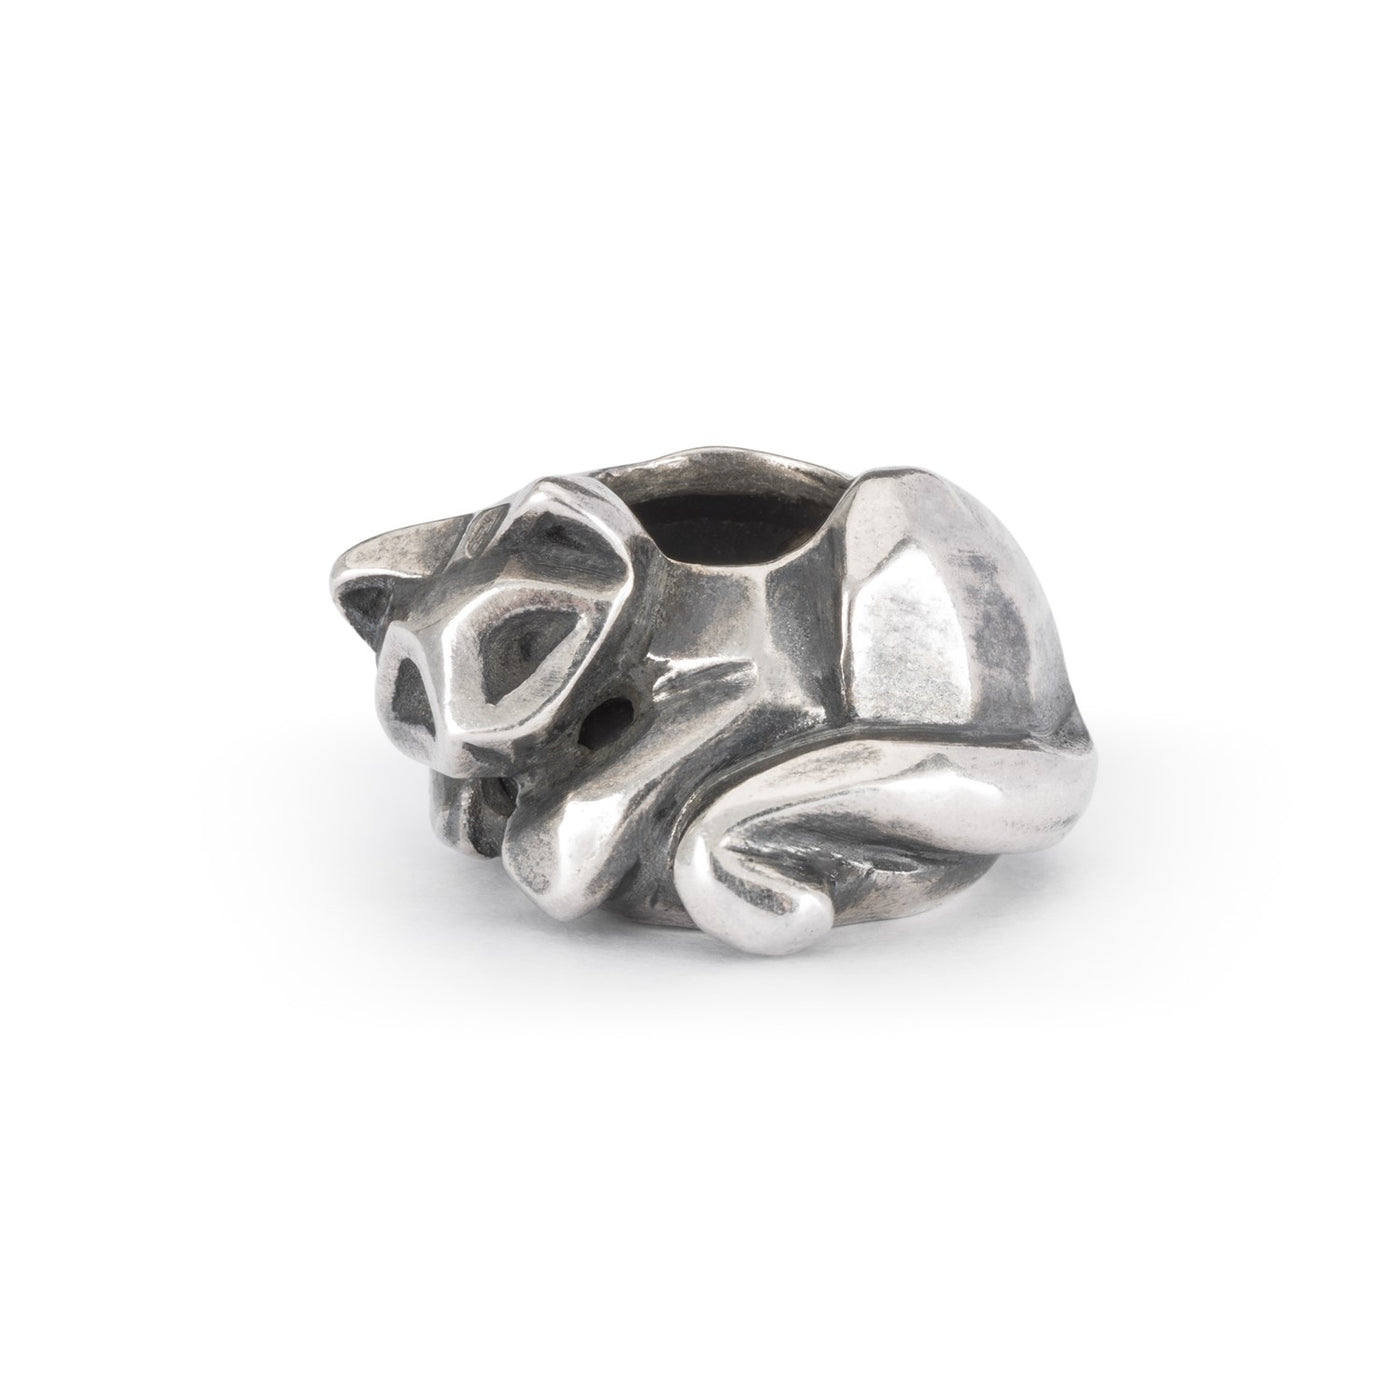 a silver jewellery spacer bead showing a cat curled up for a nap.